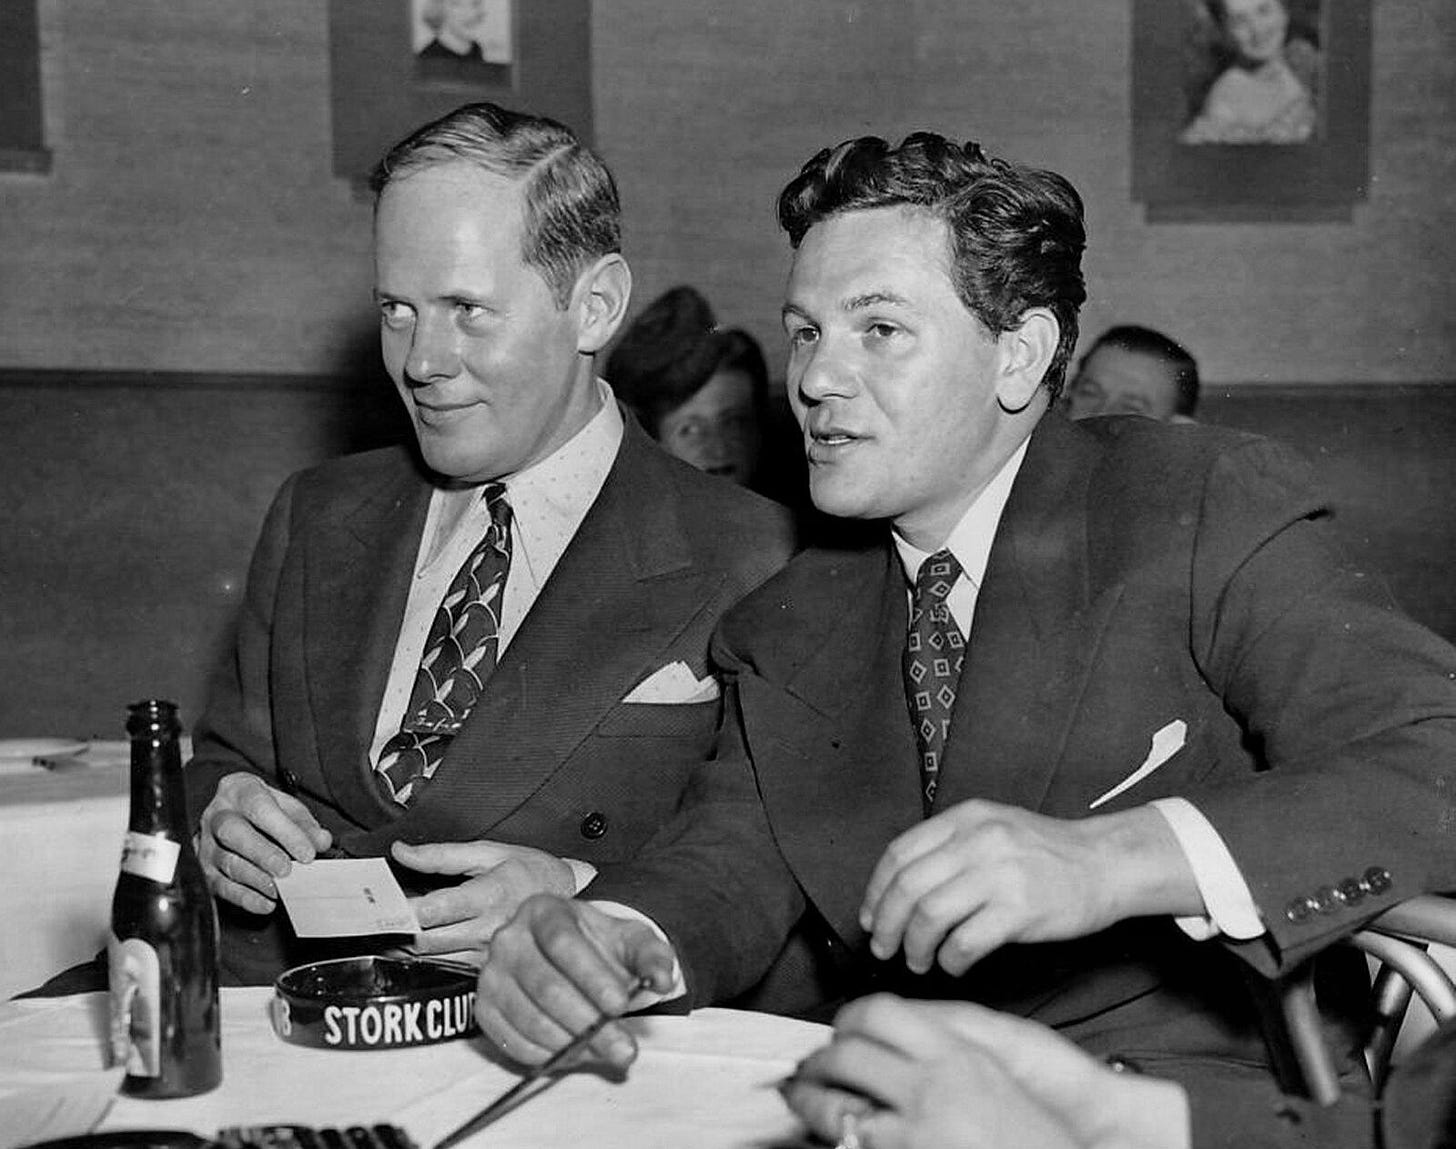 Sherman Billingsley, owner of the Stork Club in a table with actor John Garfield.